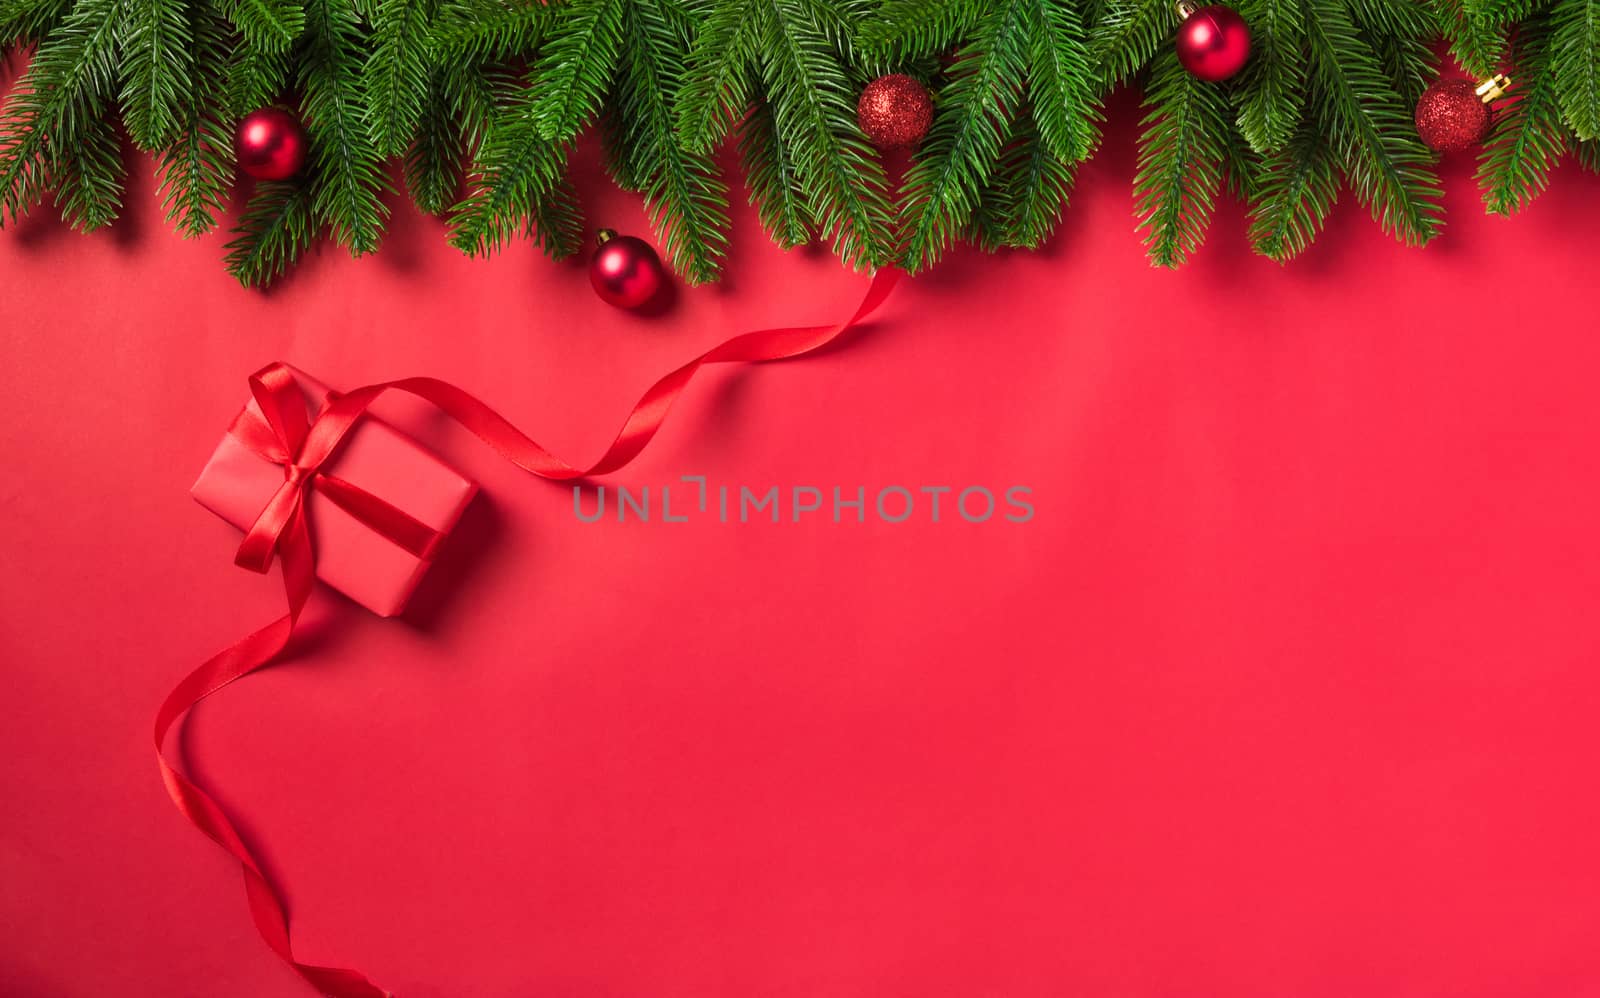 Christmas holiday background with gift box decorations by Sorapop